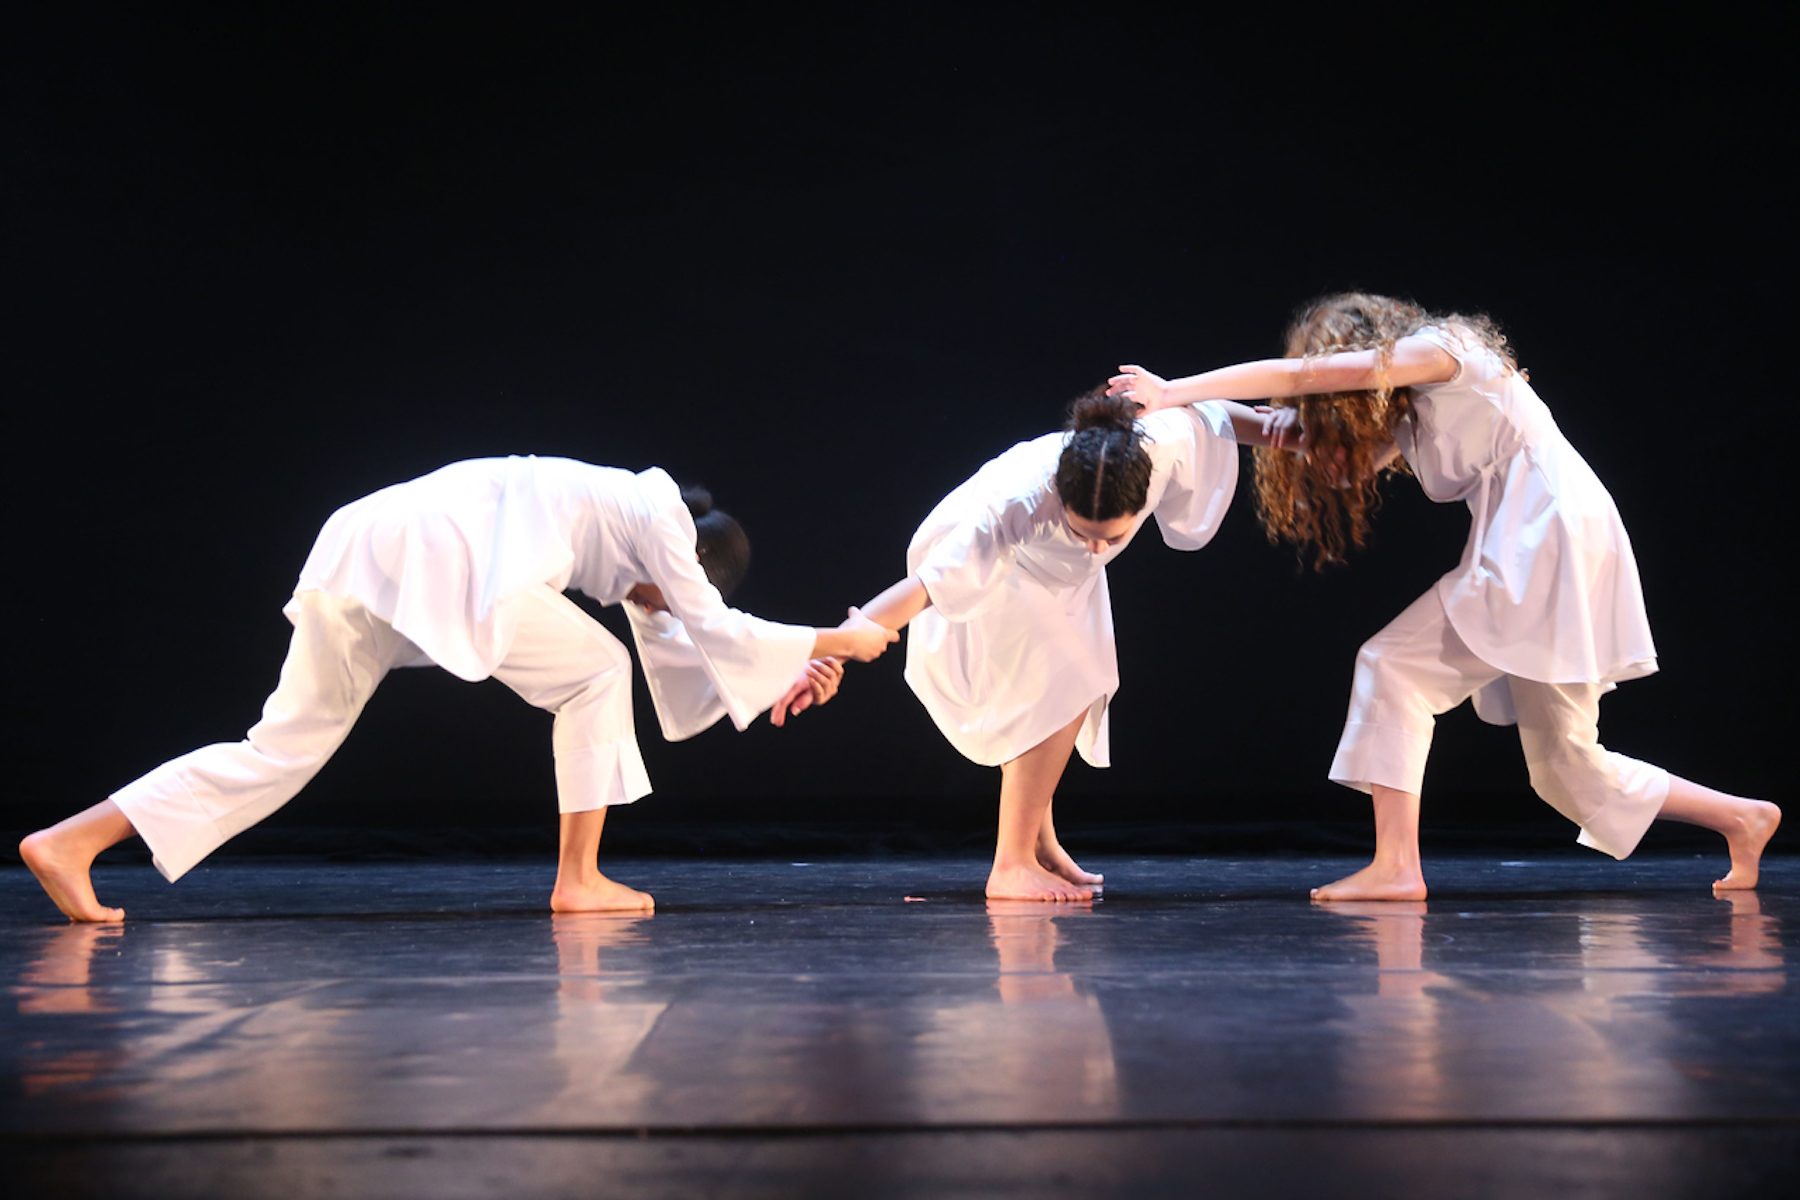 Three Fieldston Upper dancers perform on stage, wearing all white.